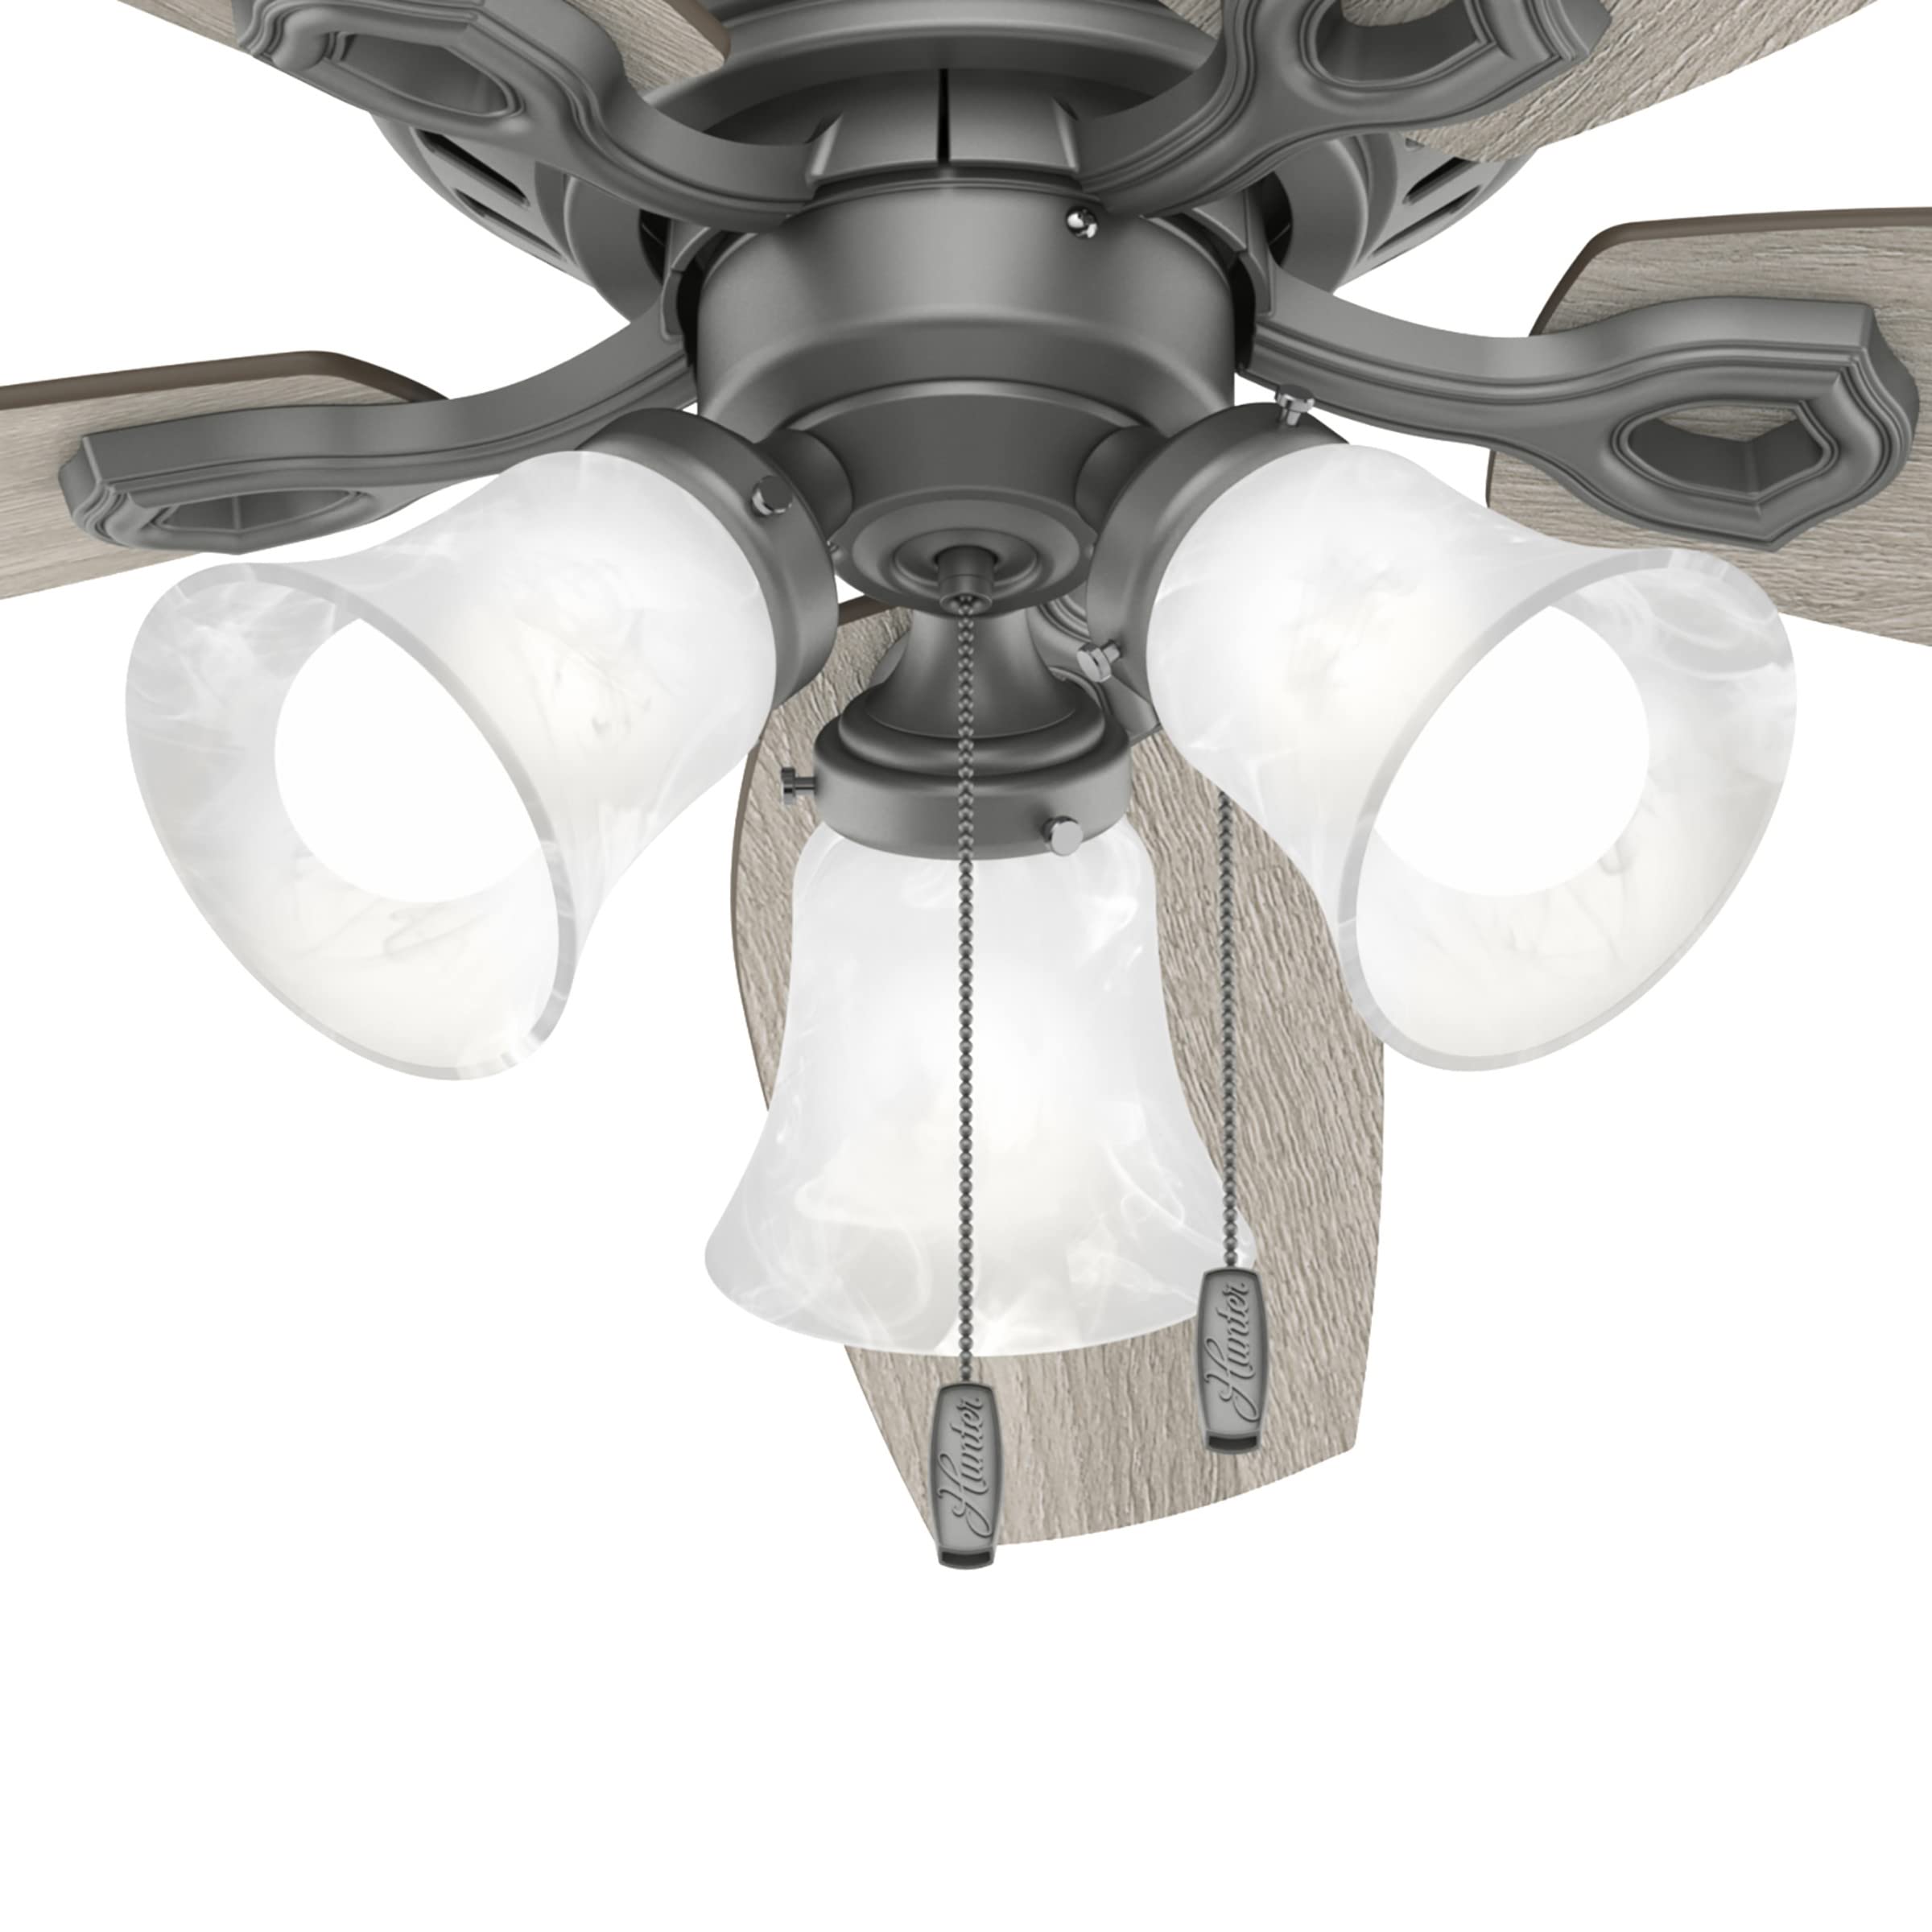 Hunter Fan Company, 51113, 52 inch Builder Matte Silver Low Profile Ceiling Fan with LED Light Kit and Pull Chain